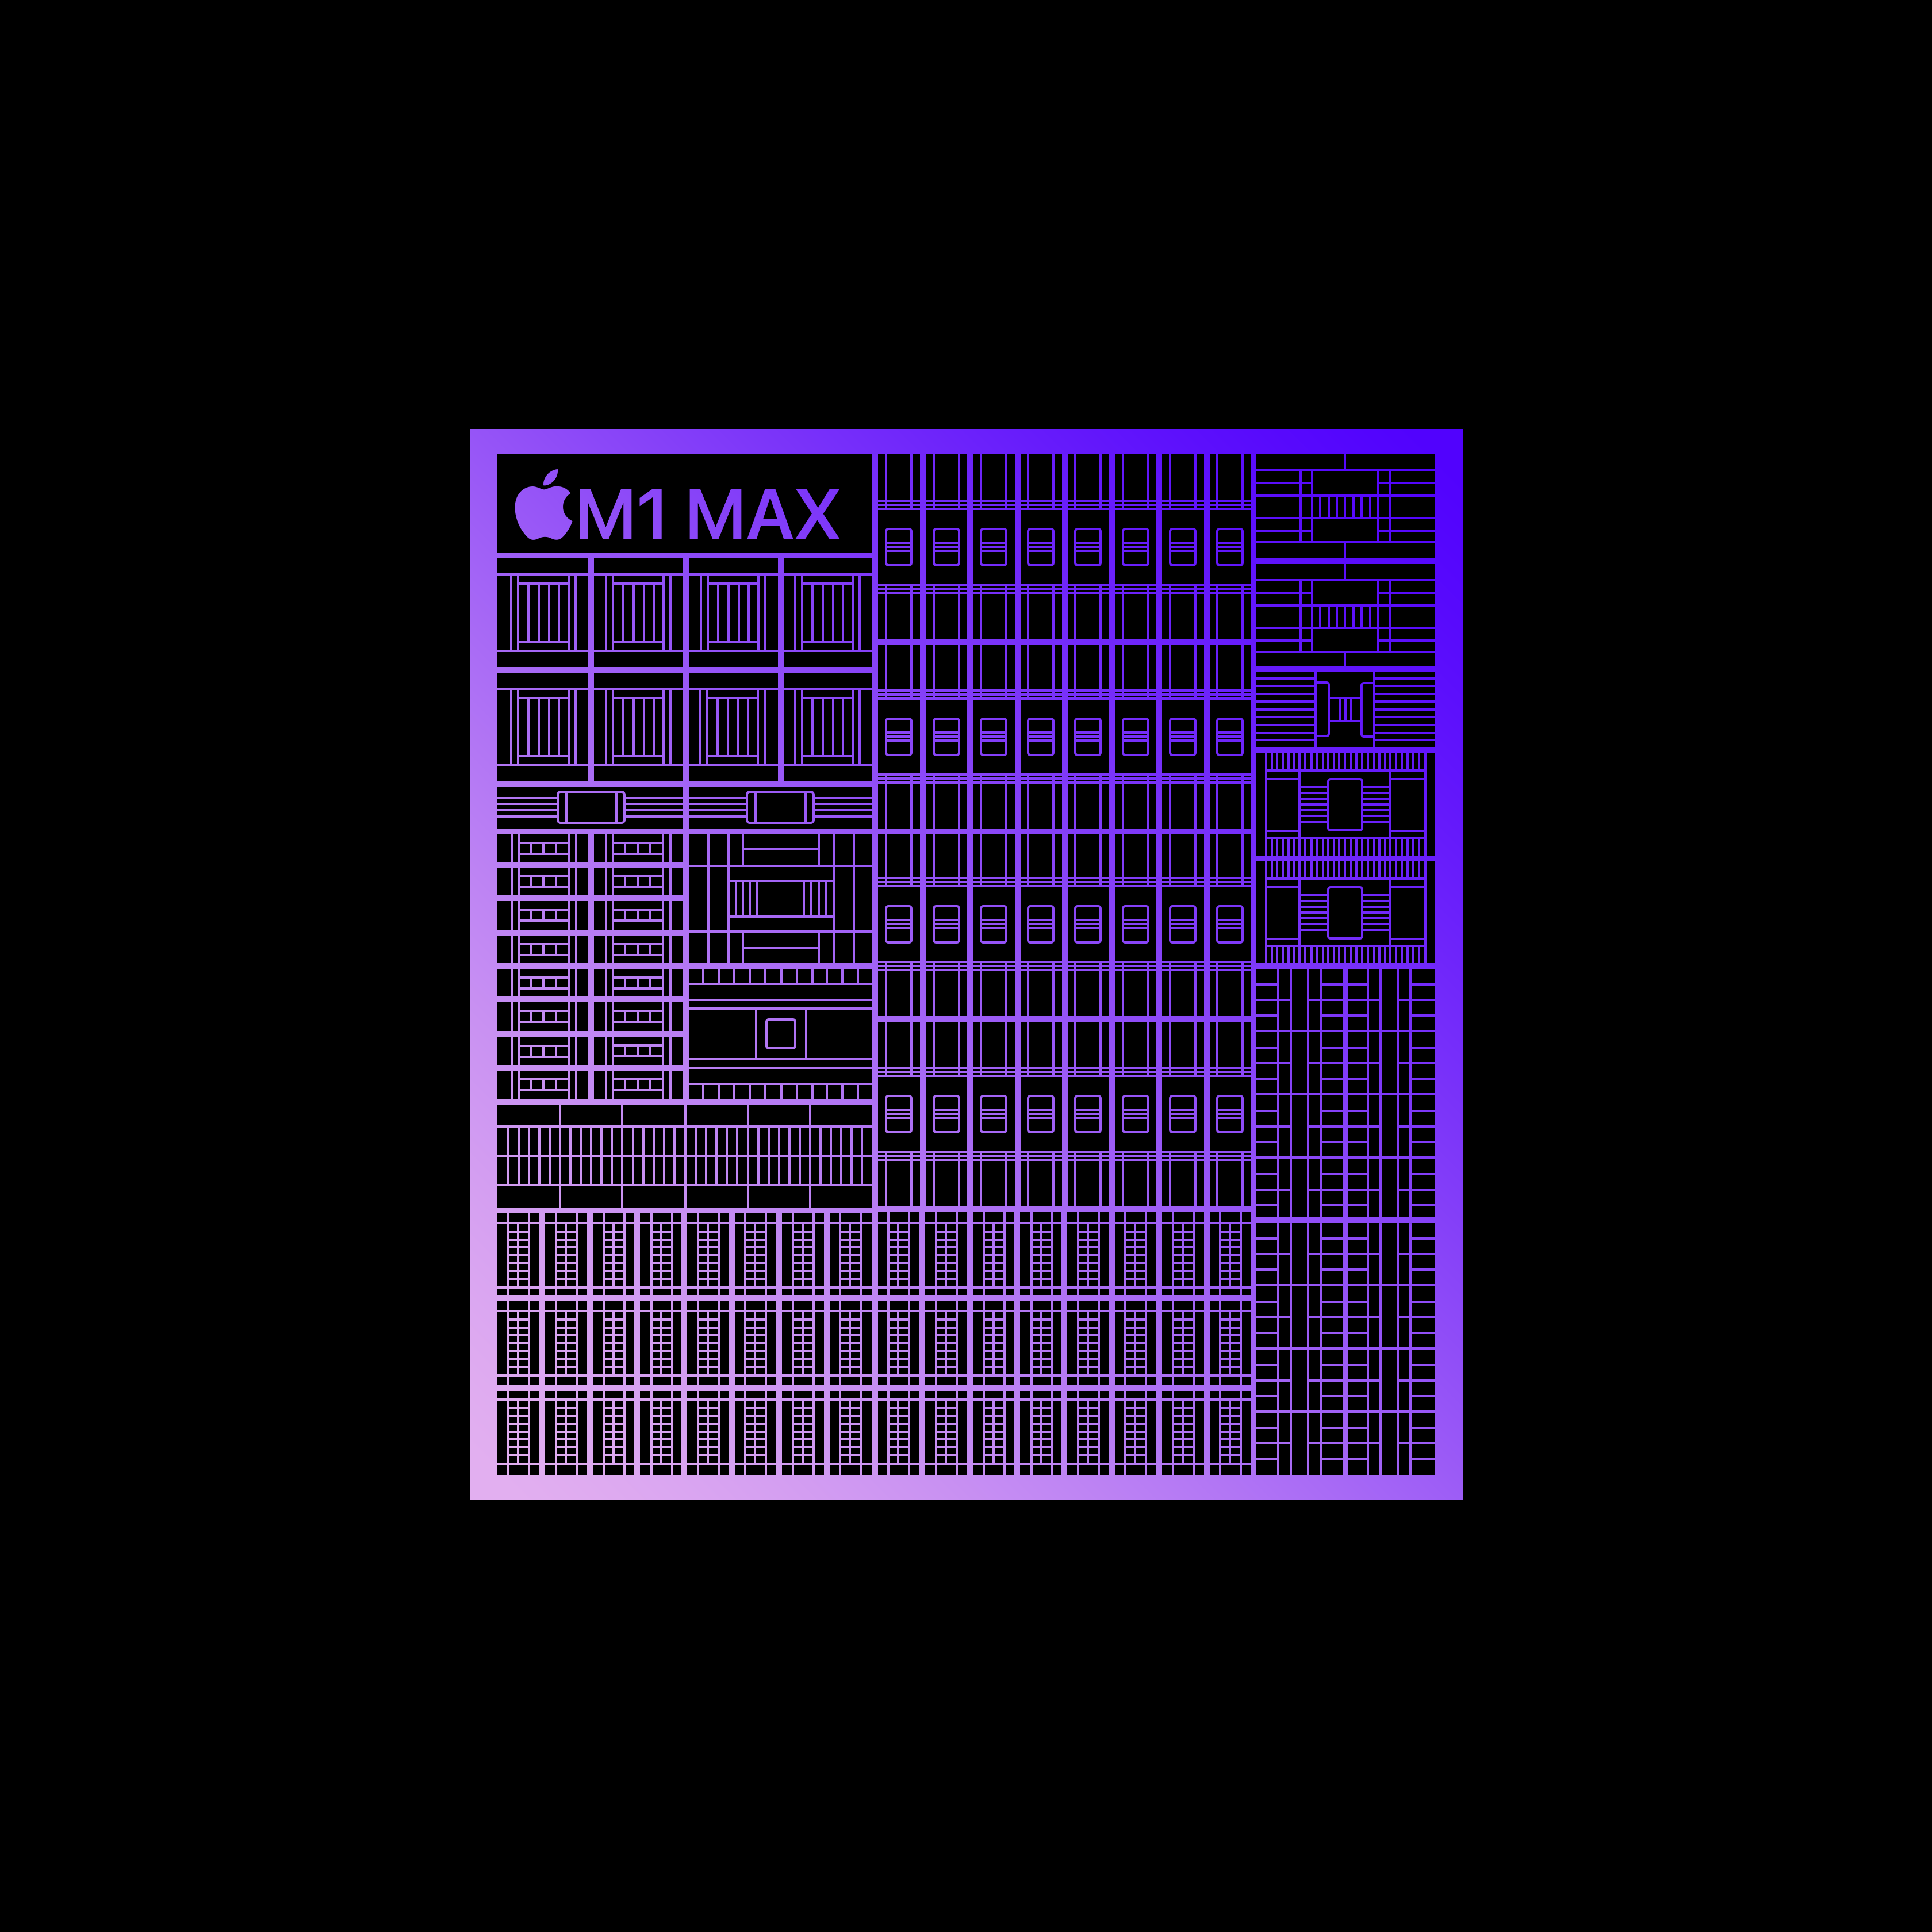 M1 Max wallpaper, the biggest wallpaper ever made. Along side with popular request A9 wallpaper